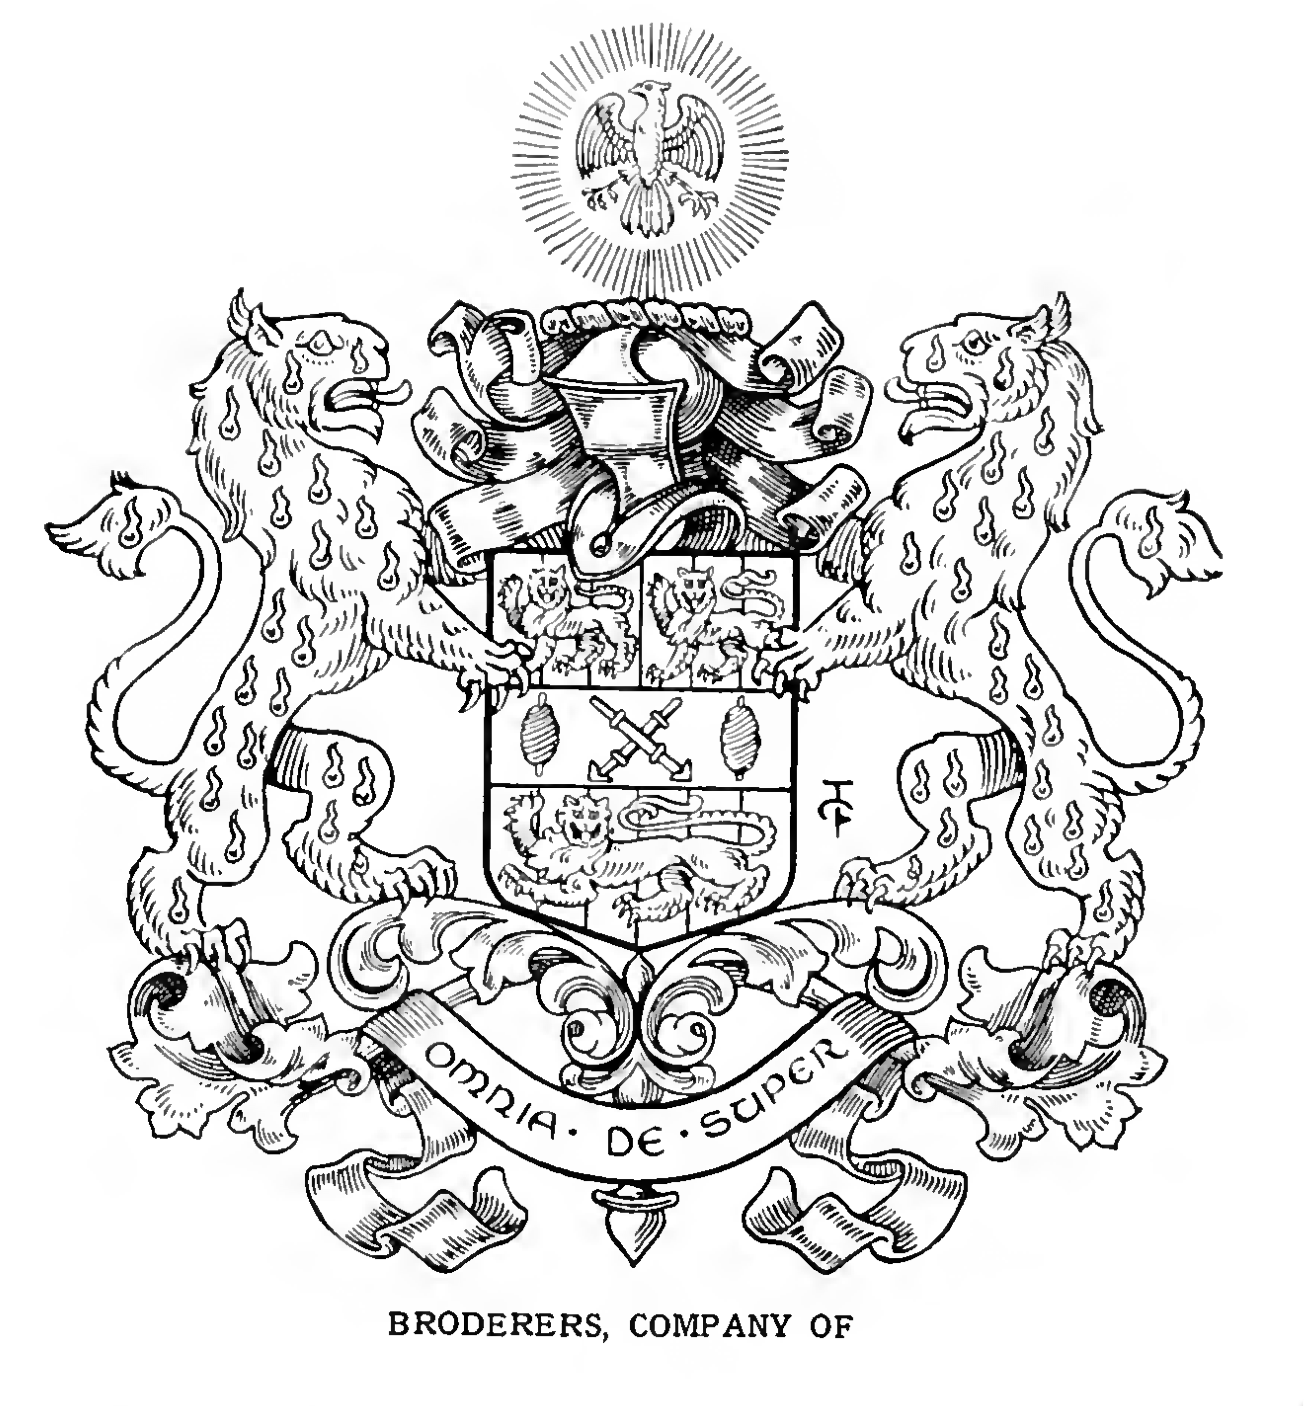 BRODERERS, Worshipful Company of (London).